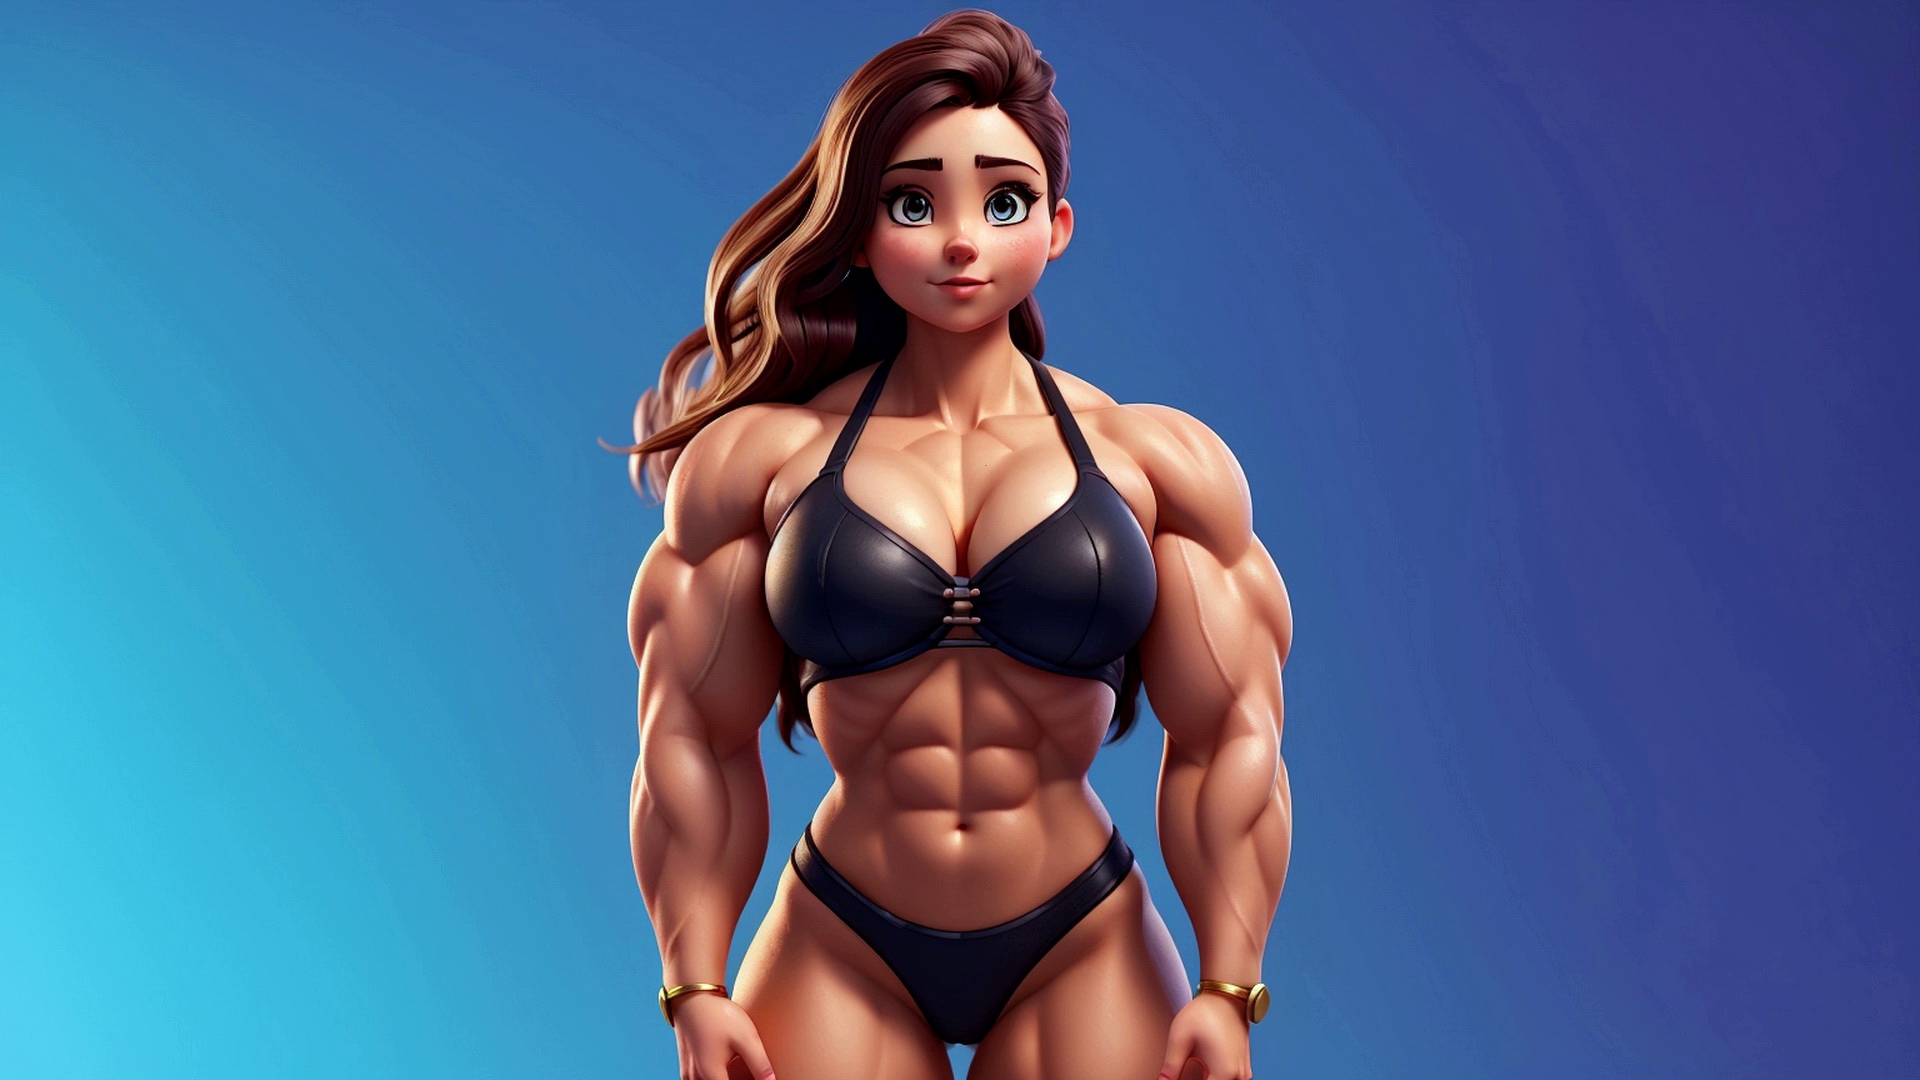 Red-haired girl bodybuilder standing on a blue background